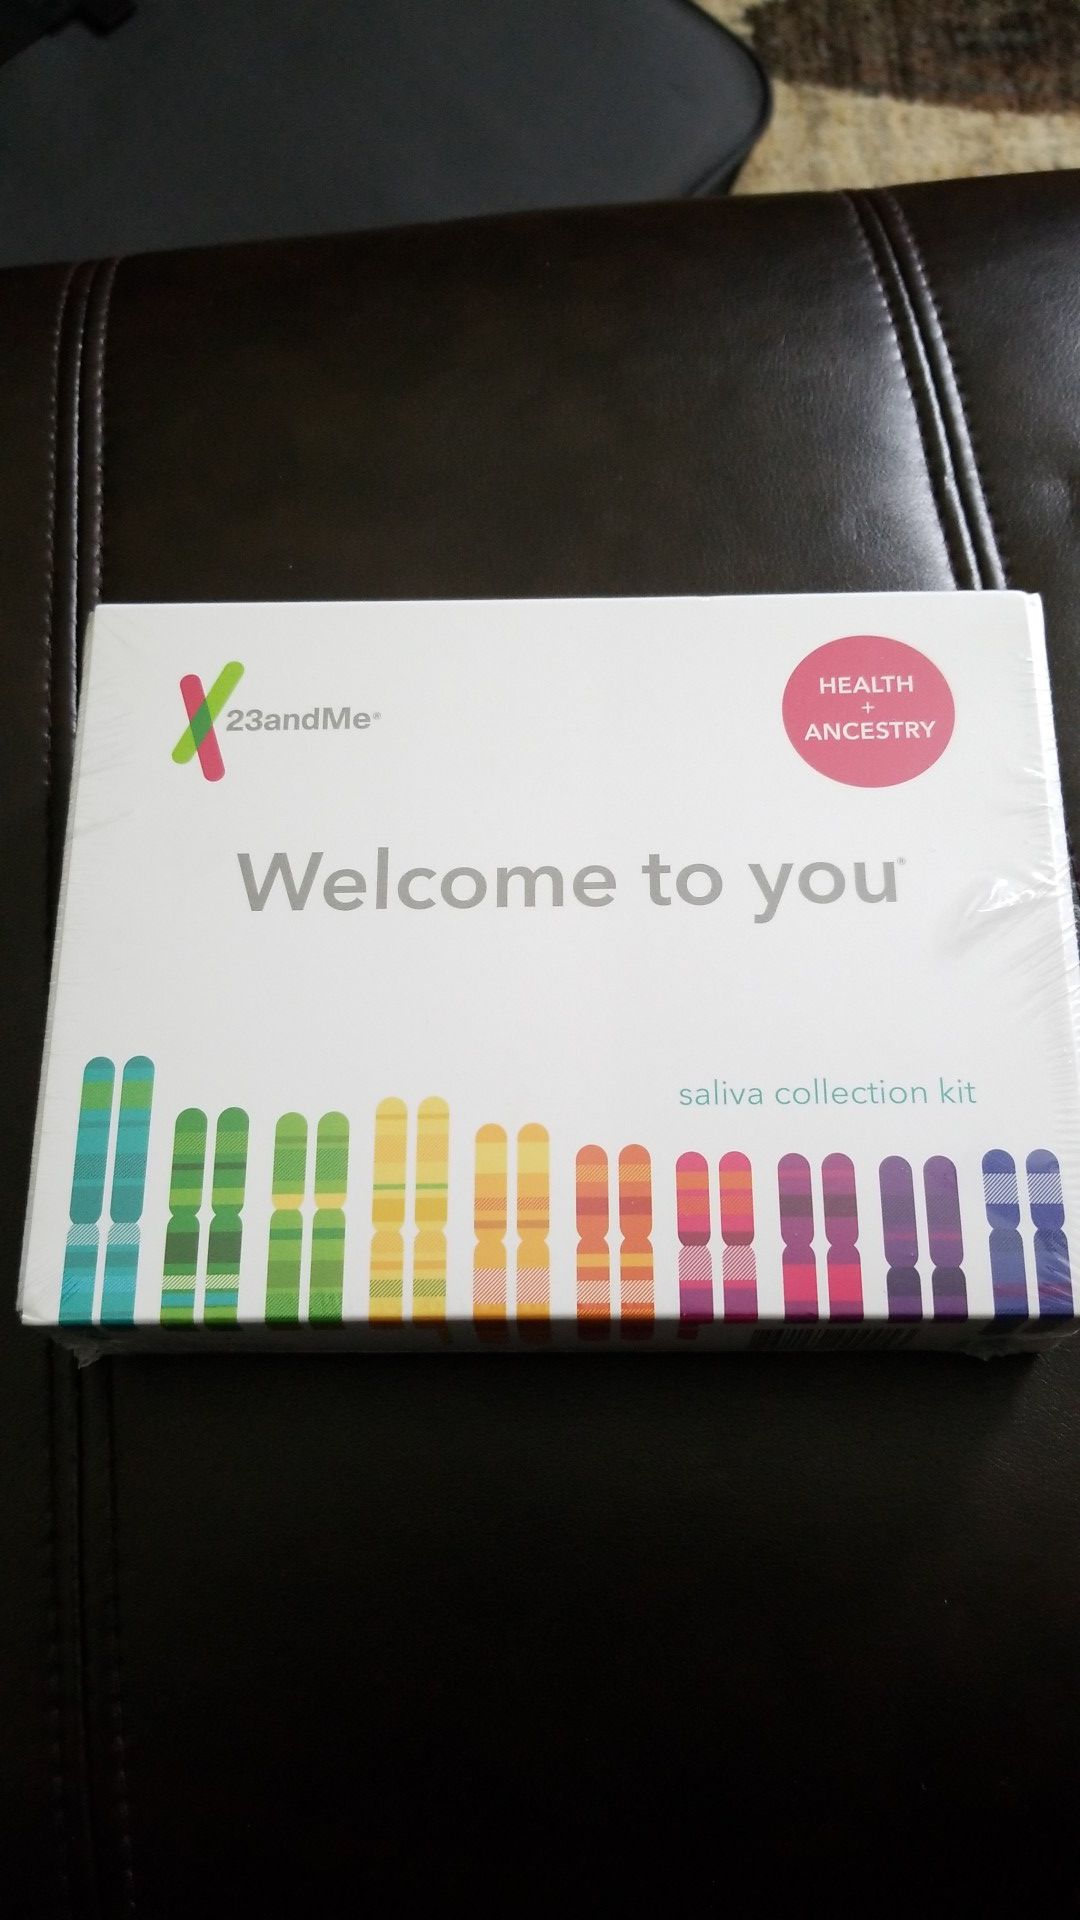 23andMe Health and Ancestry